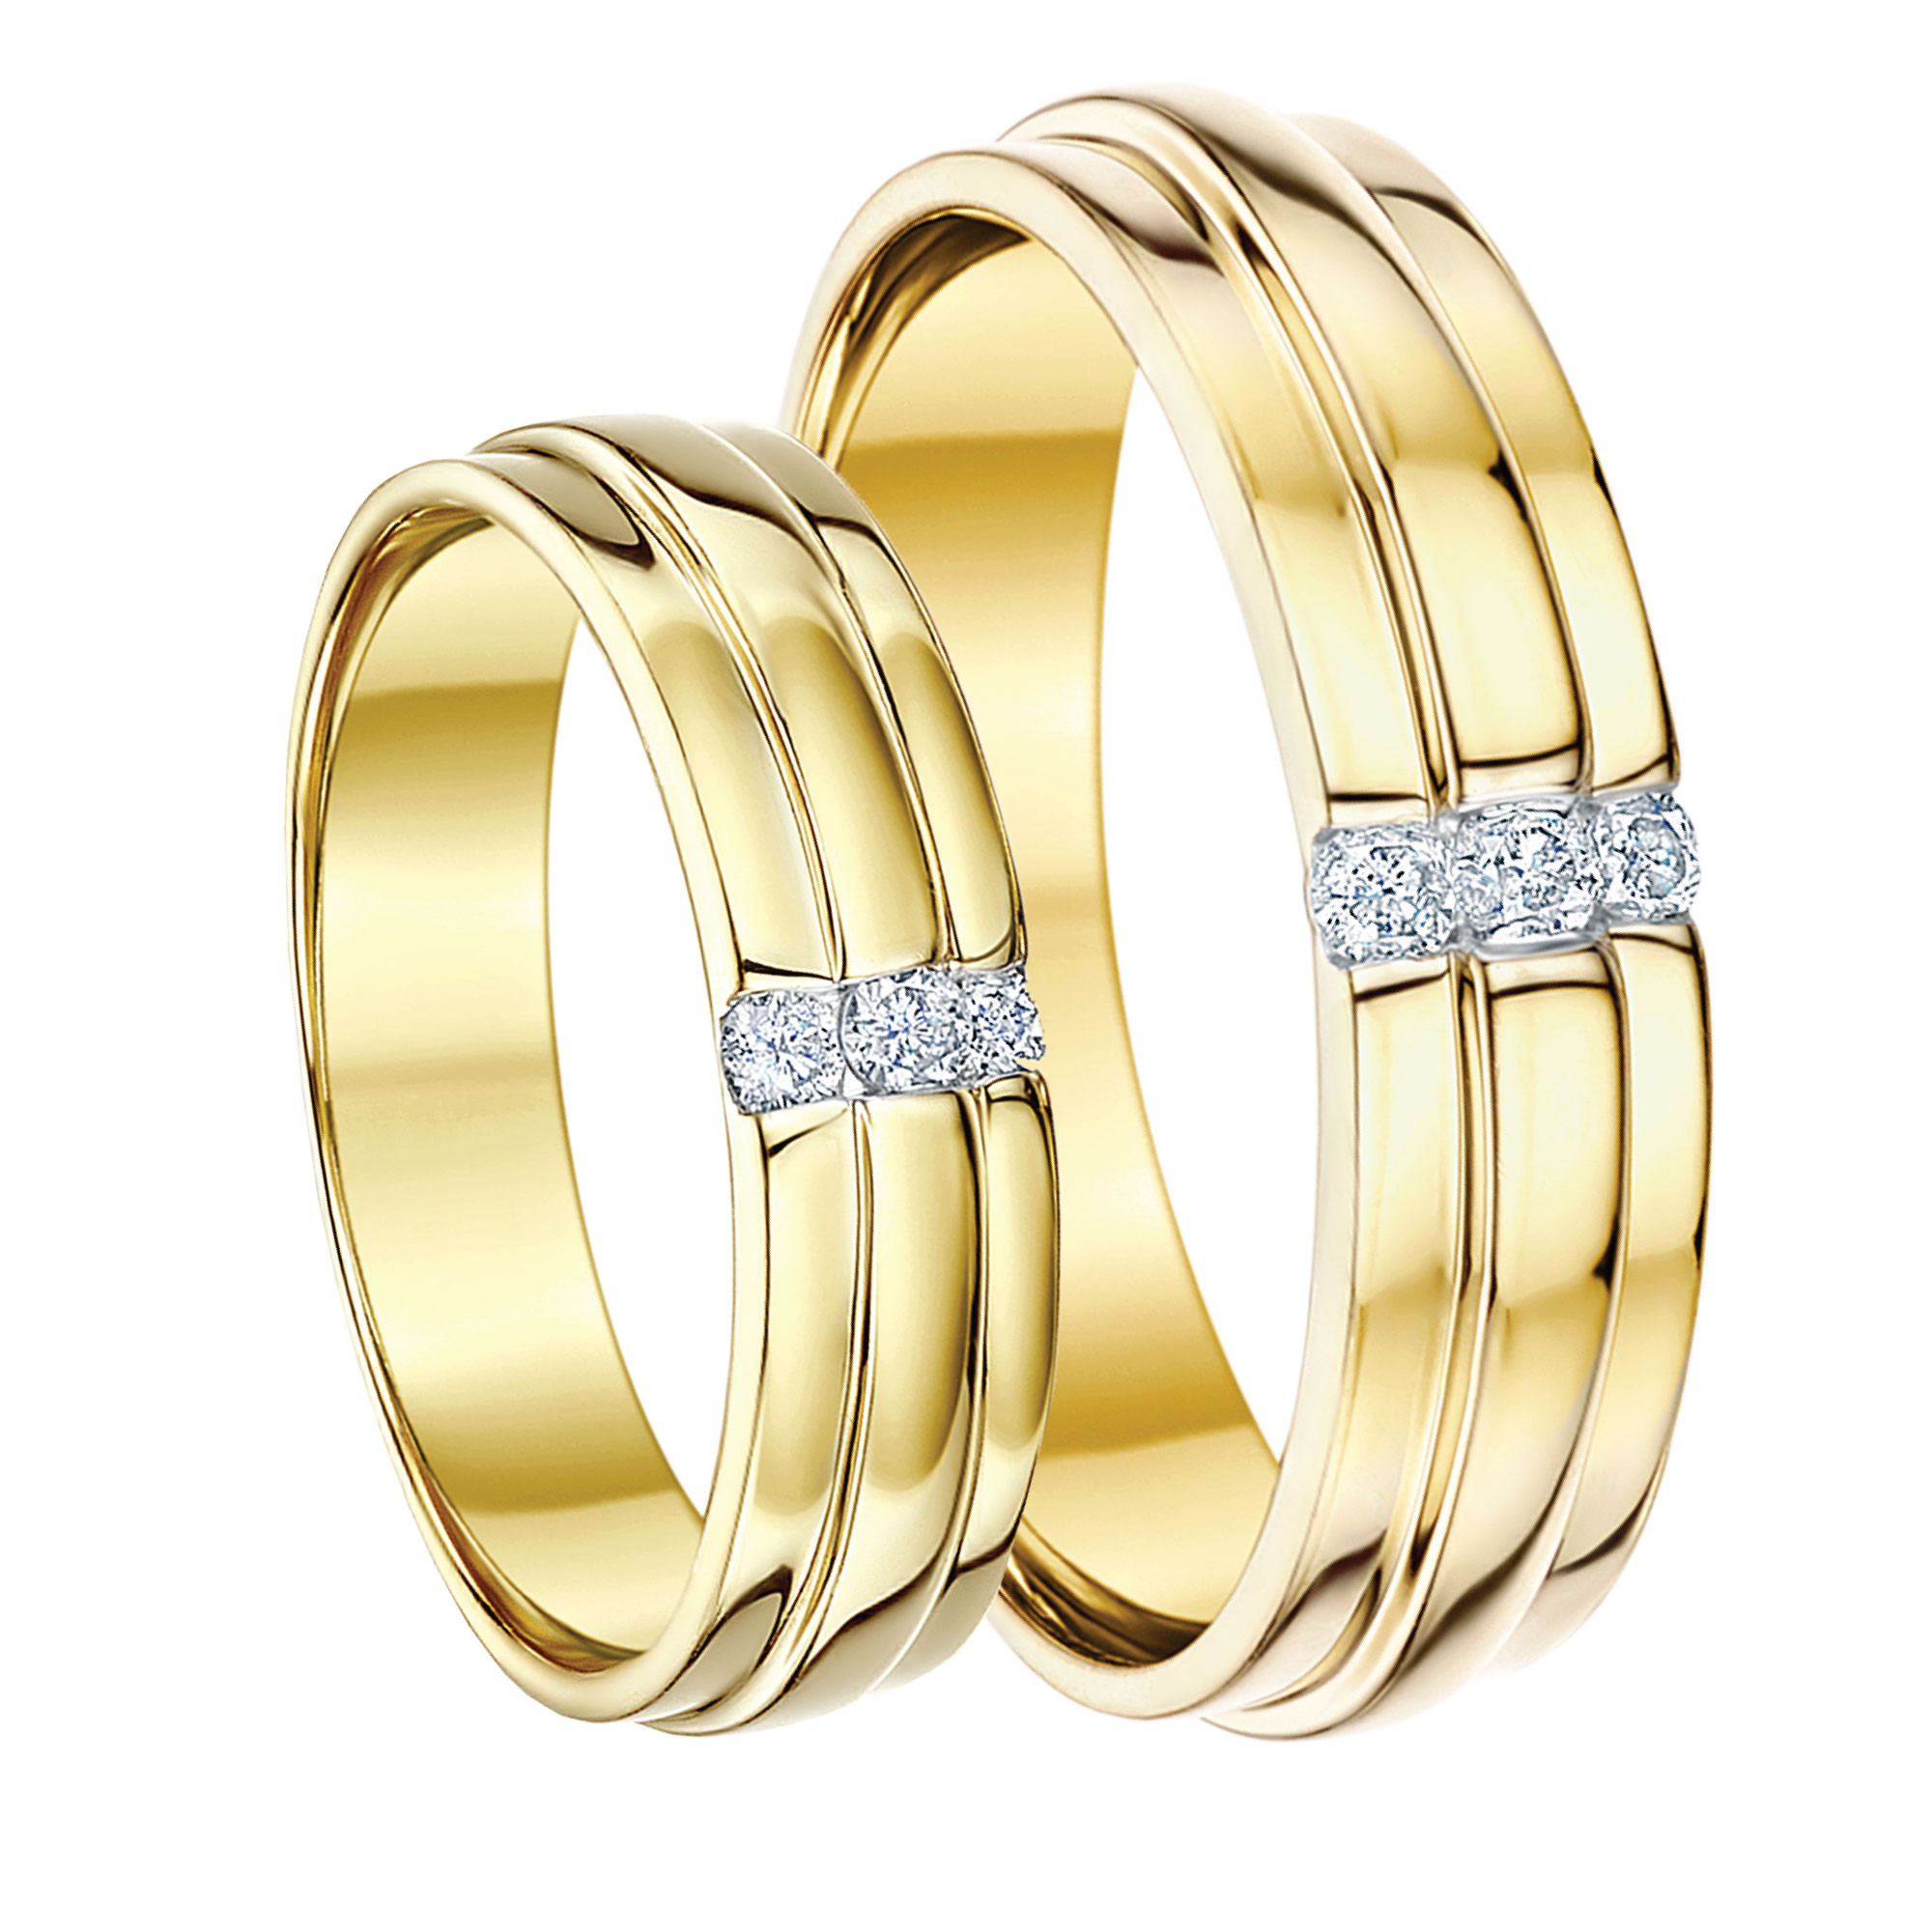 Gold Wedding Rings For Him
 His Hers 5&6 9ct Yellow Gold Diamond Wedding Rings